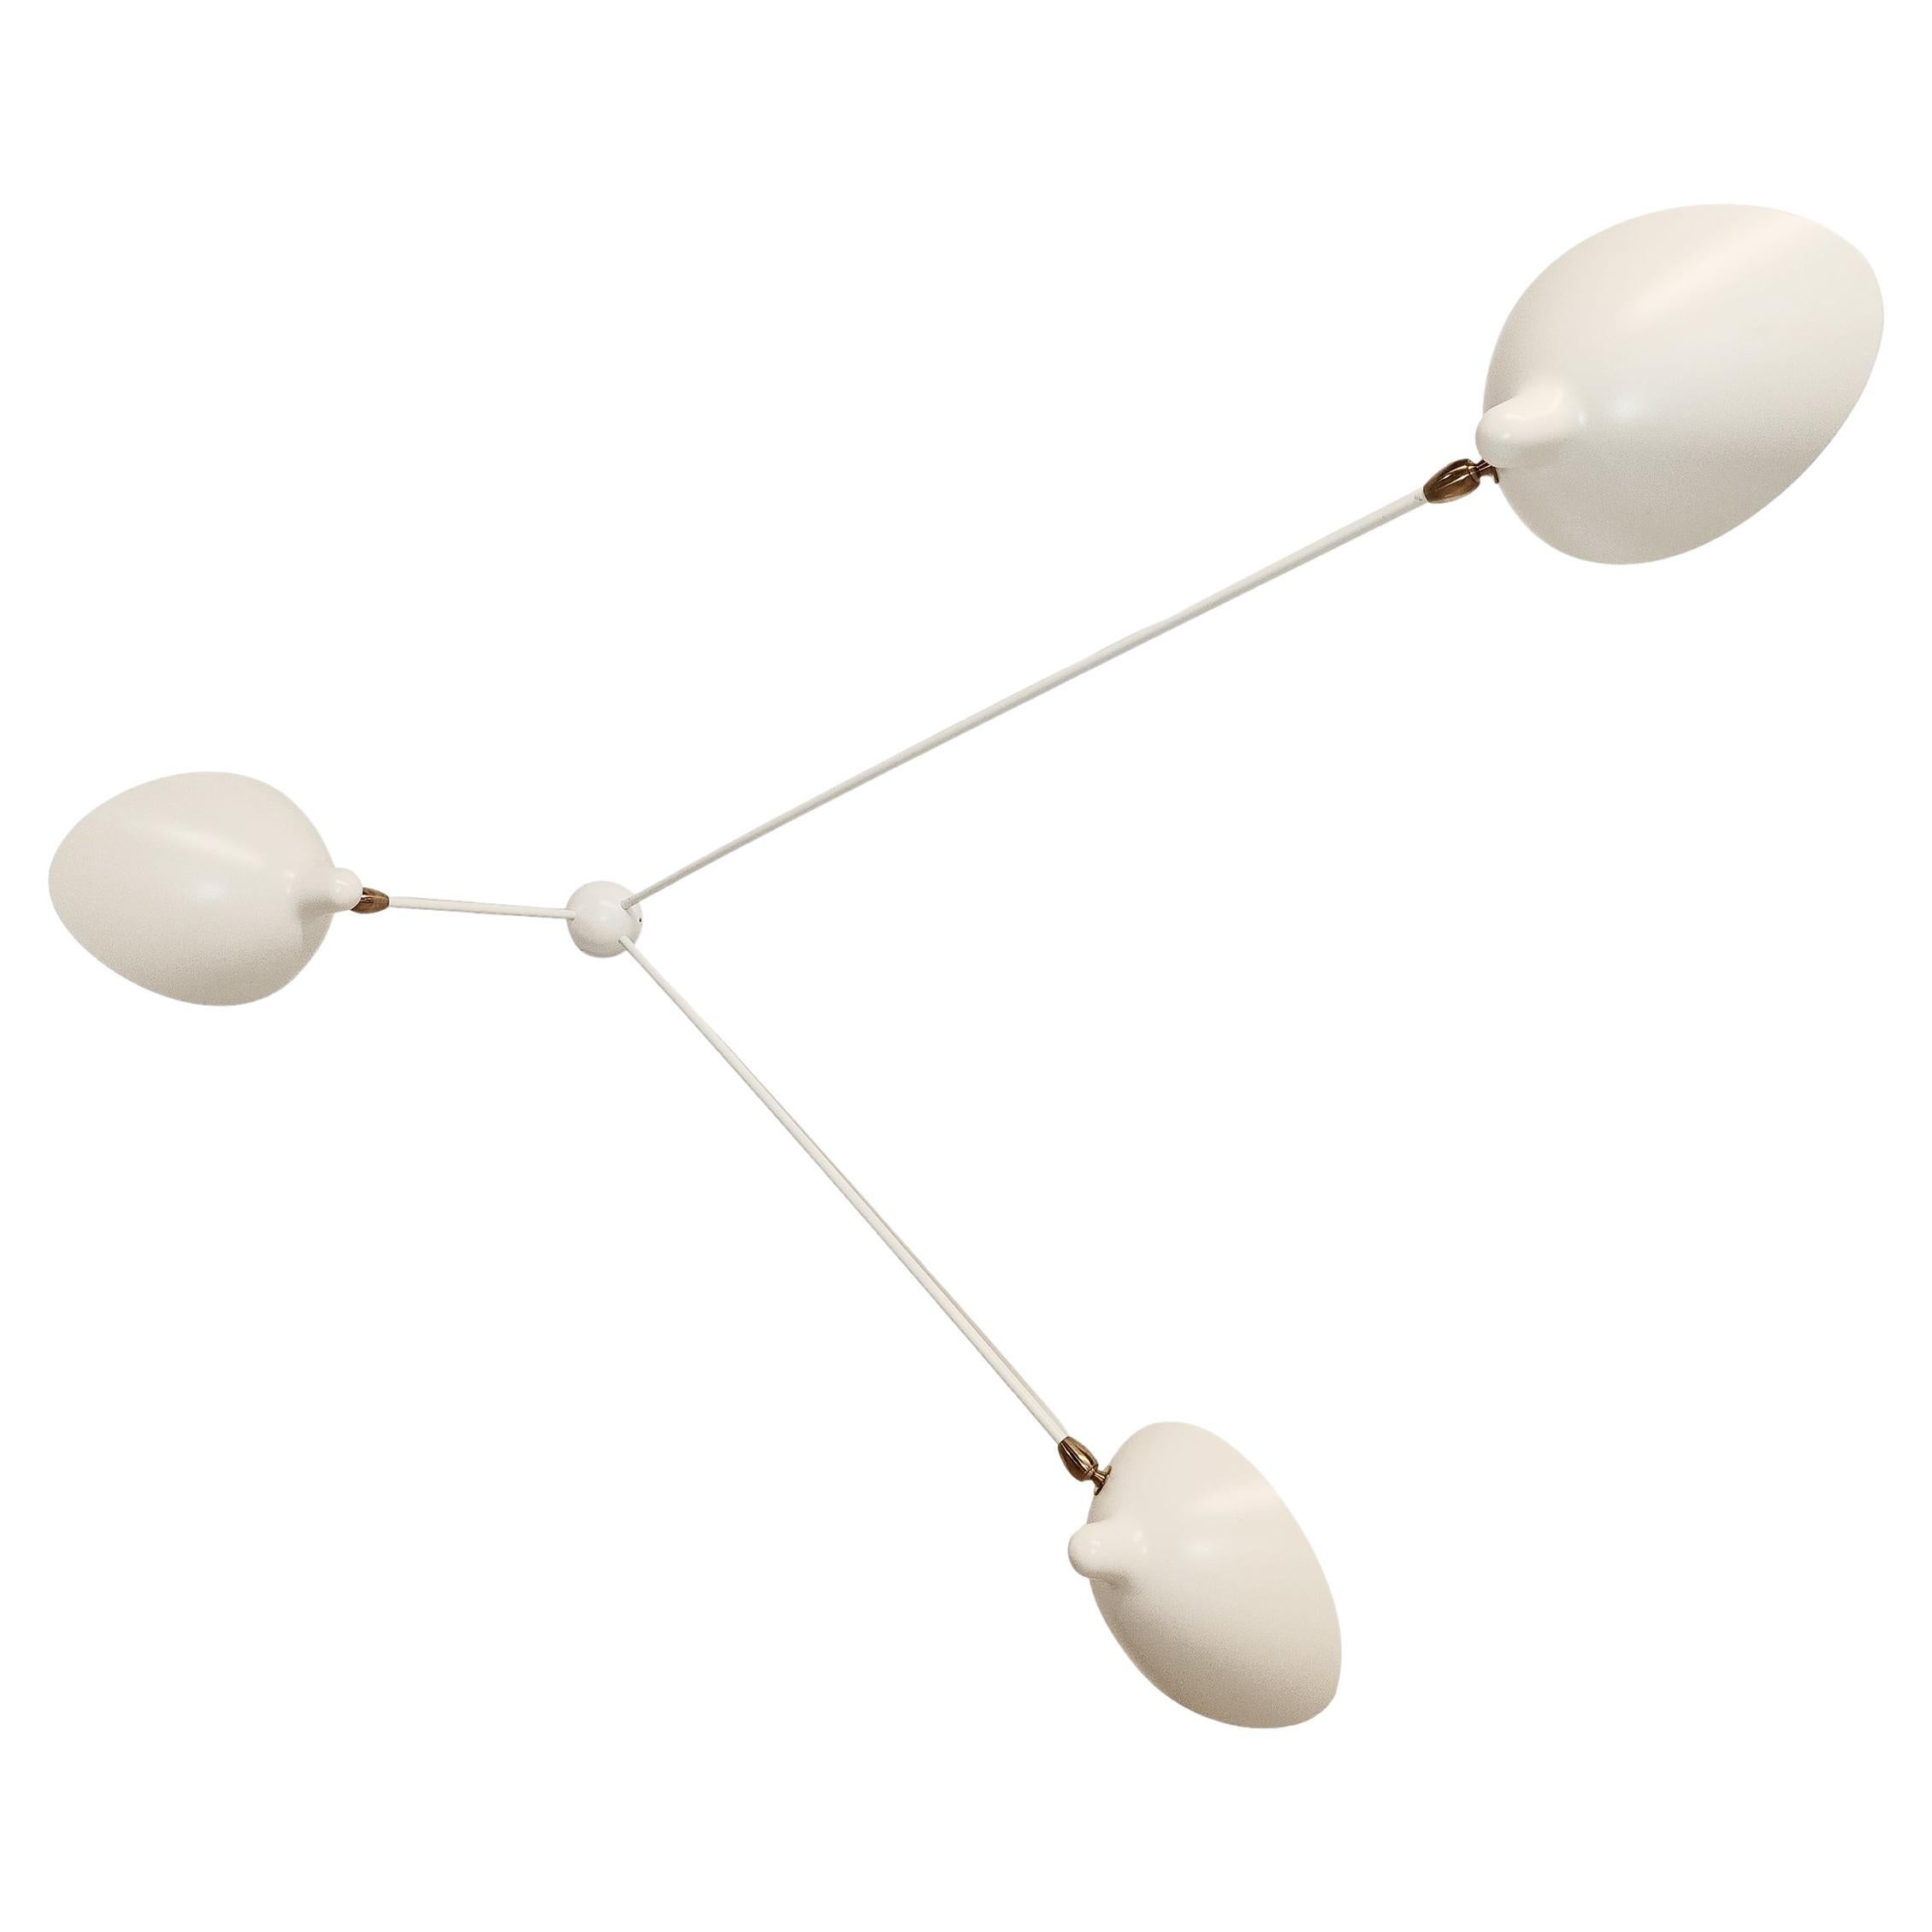 Serge Mouille - Spider Sconce with 3 Arms in White or Black